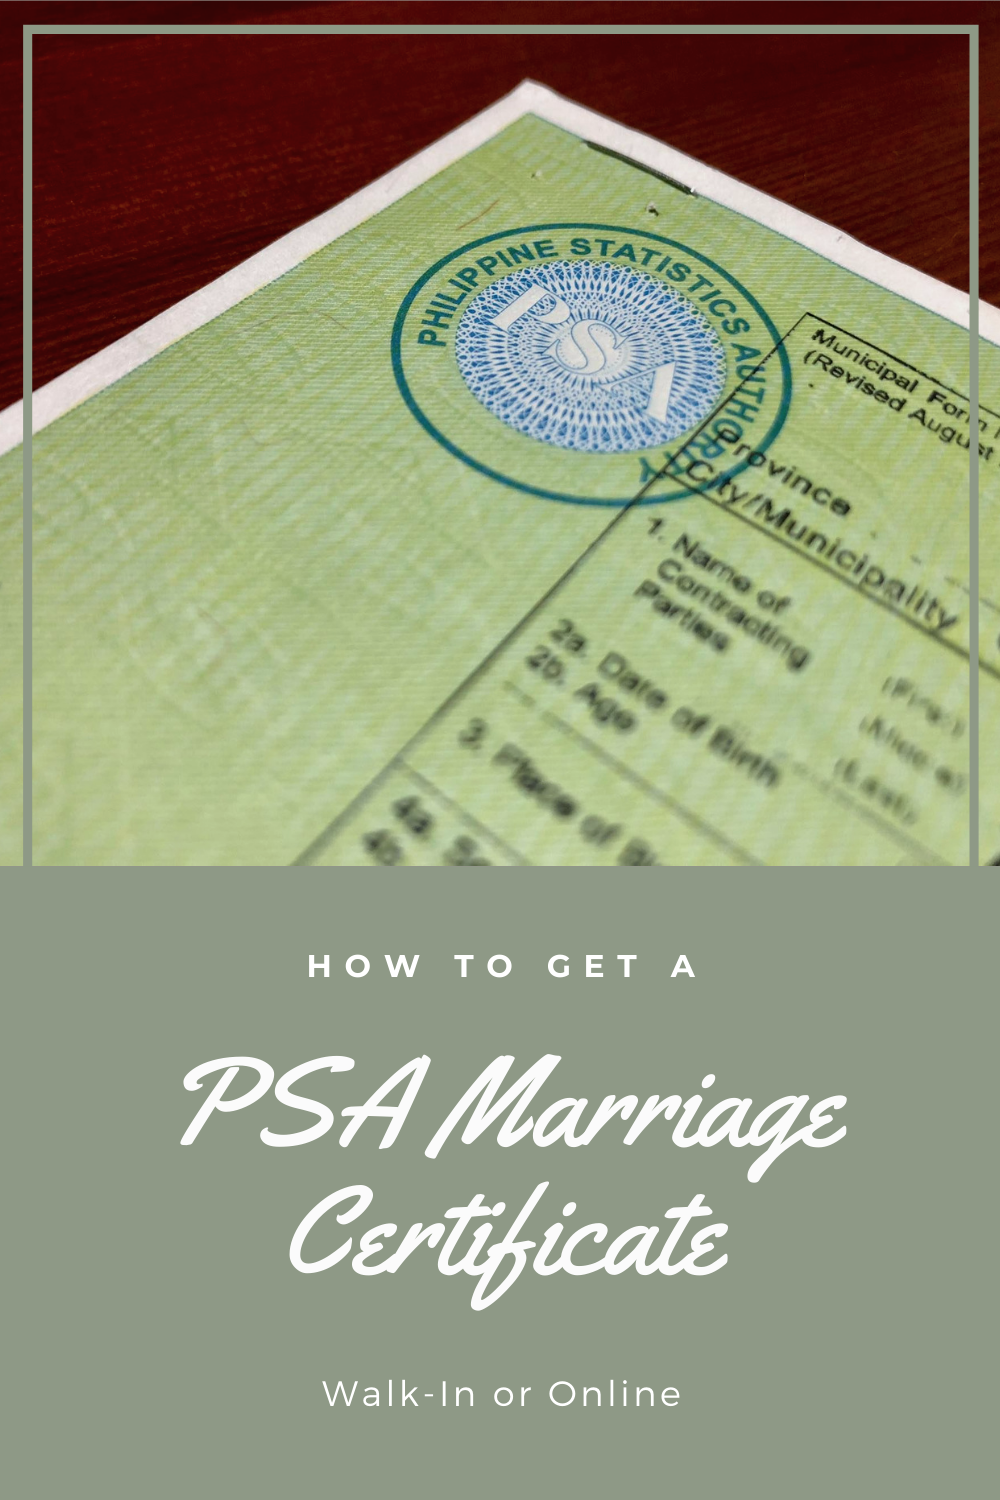 How to get a PSA Marriage Certificate